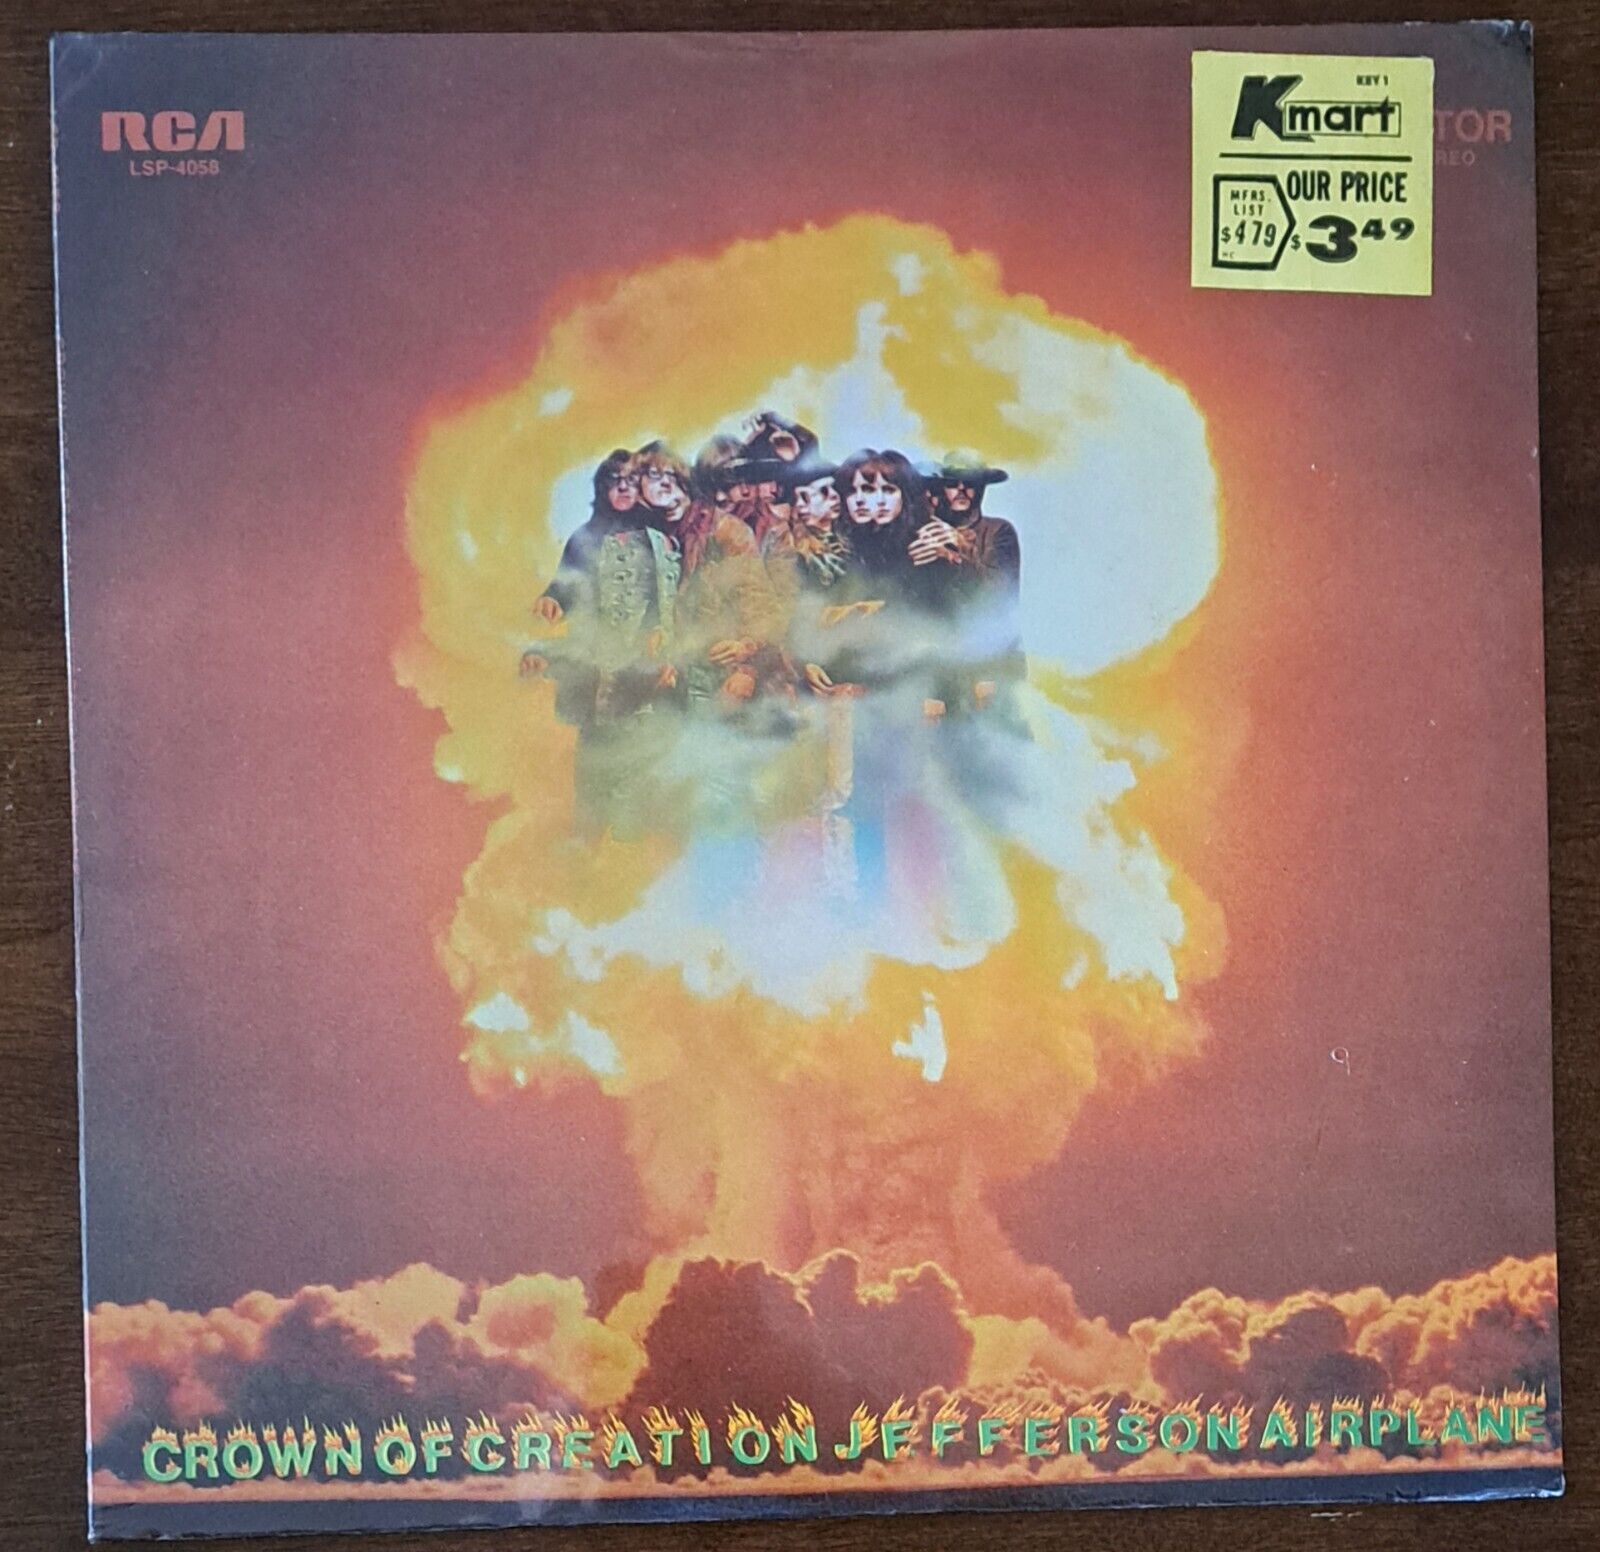 SEALED! '68 "Crown Of Creation" MINT  JEFFERSON AIRPLANE STUNNING! 1st PRESSING 